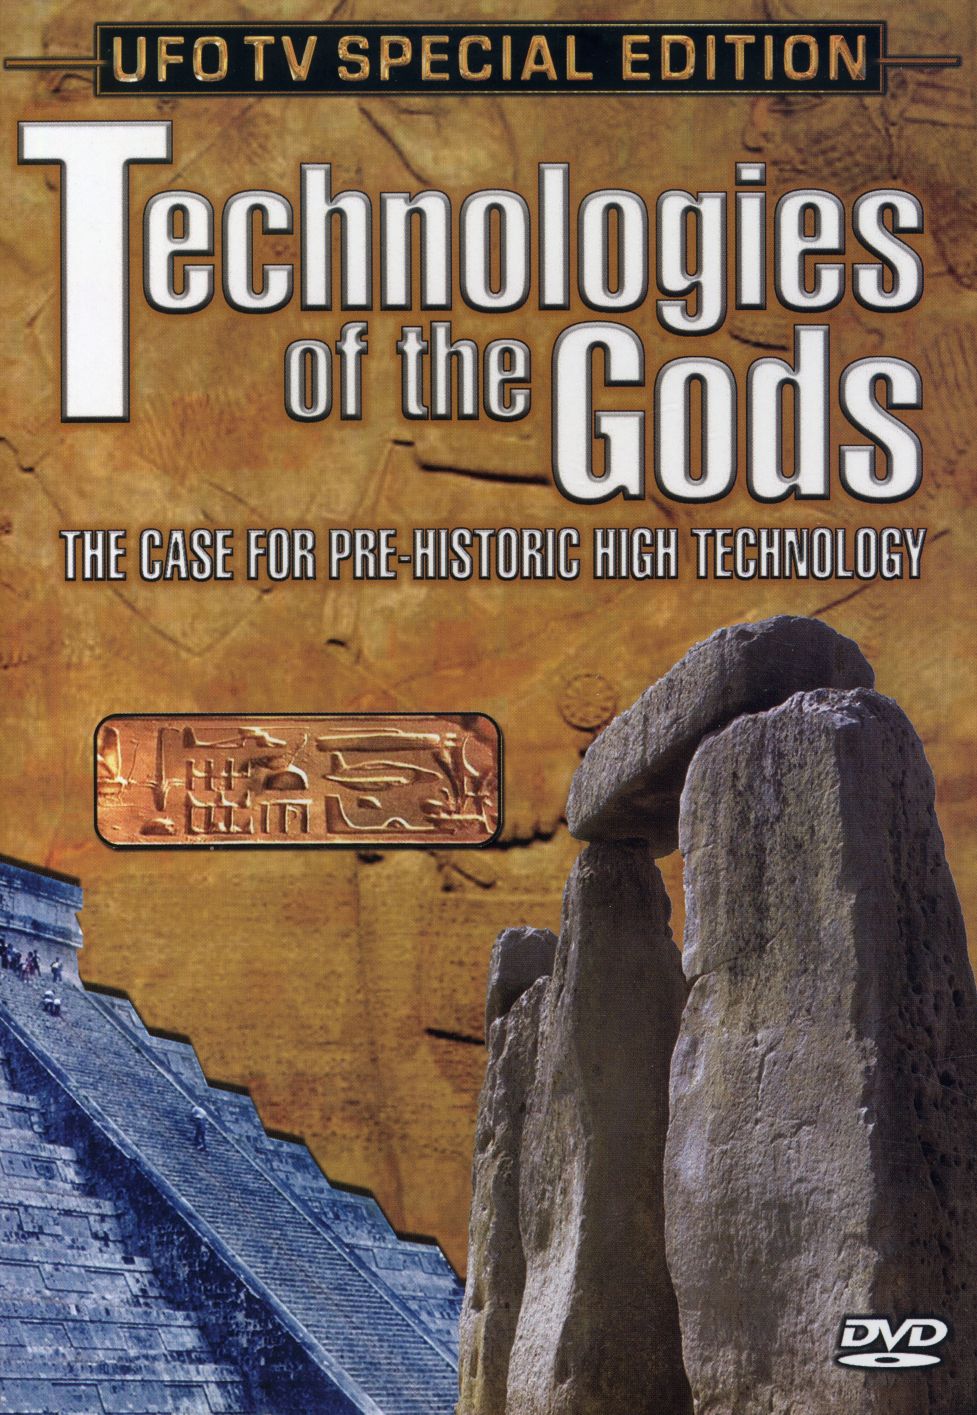 TECHNOLOGIES OF THE GODS: CASE FOR PRE-HISTORIC